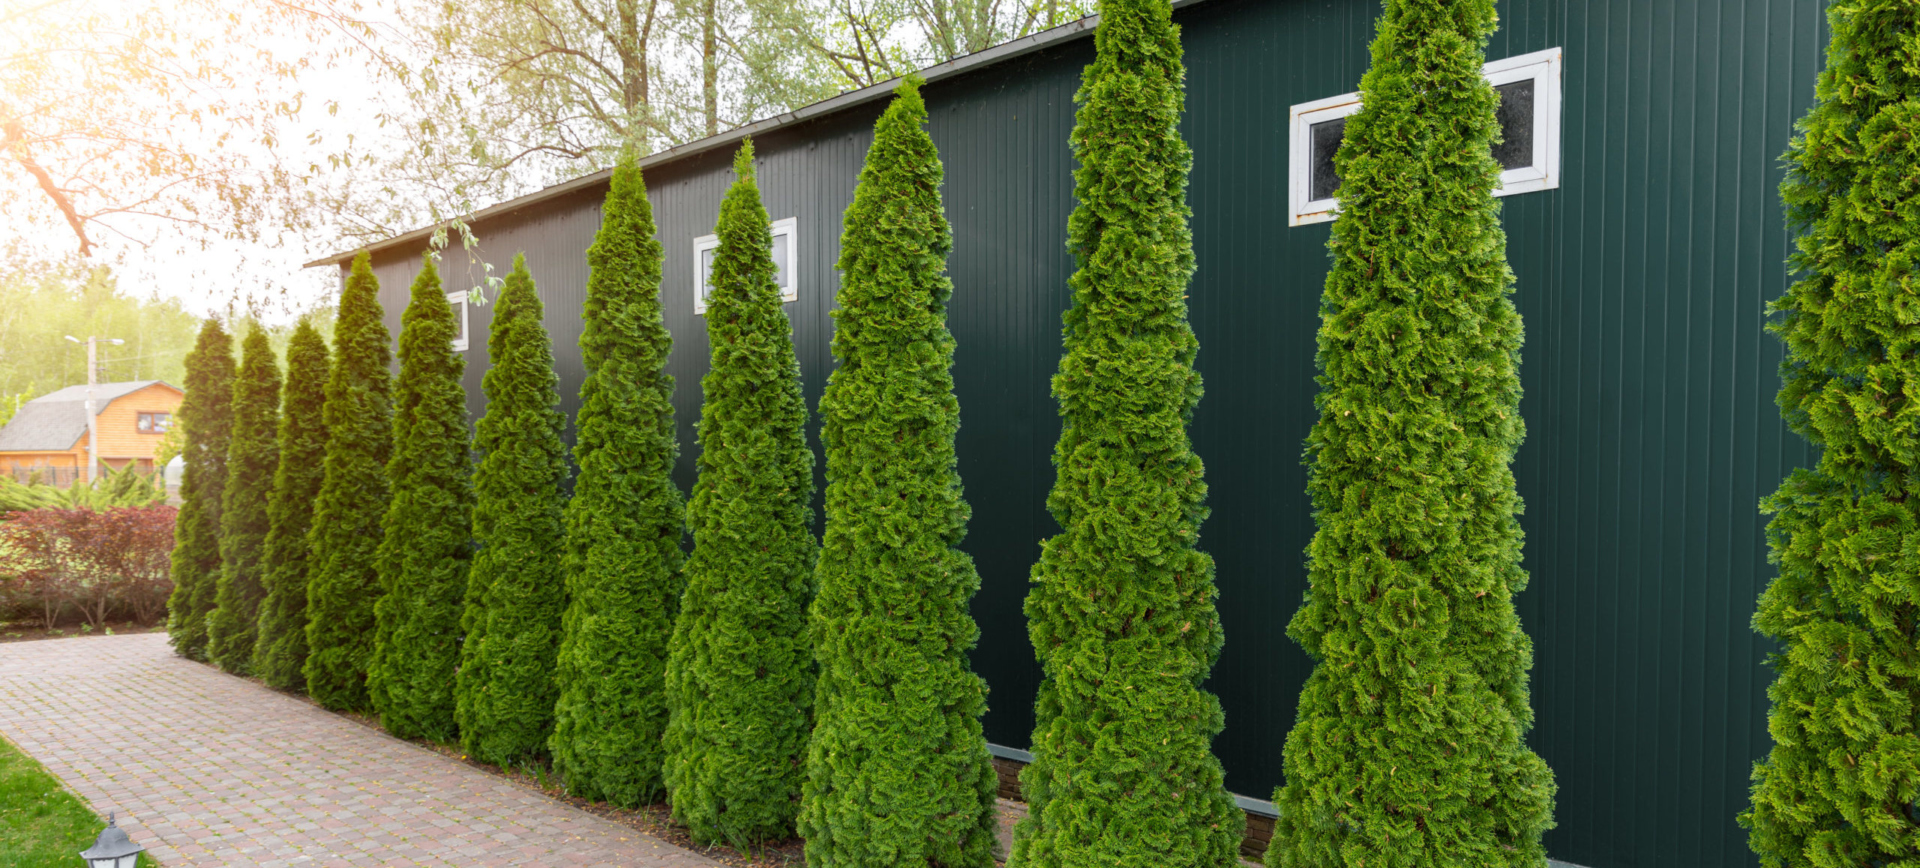 Arborvitae forming a living fence against the side of a building.